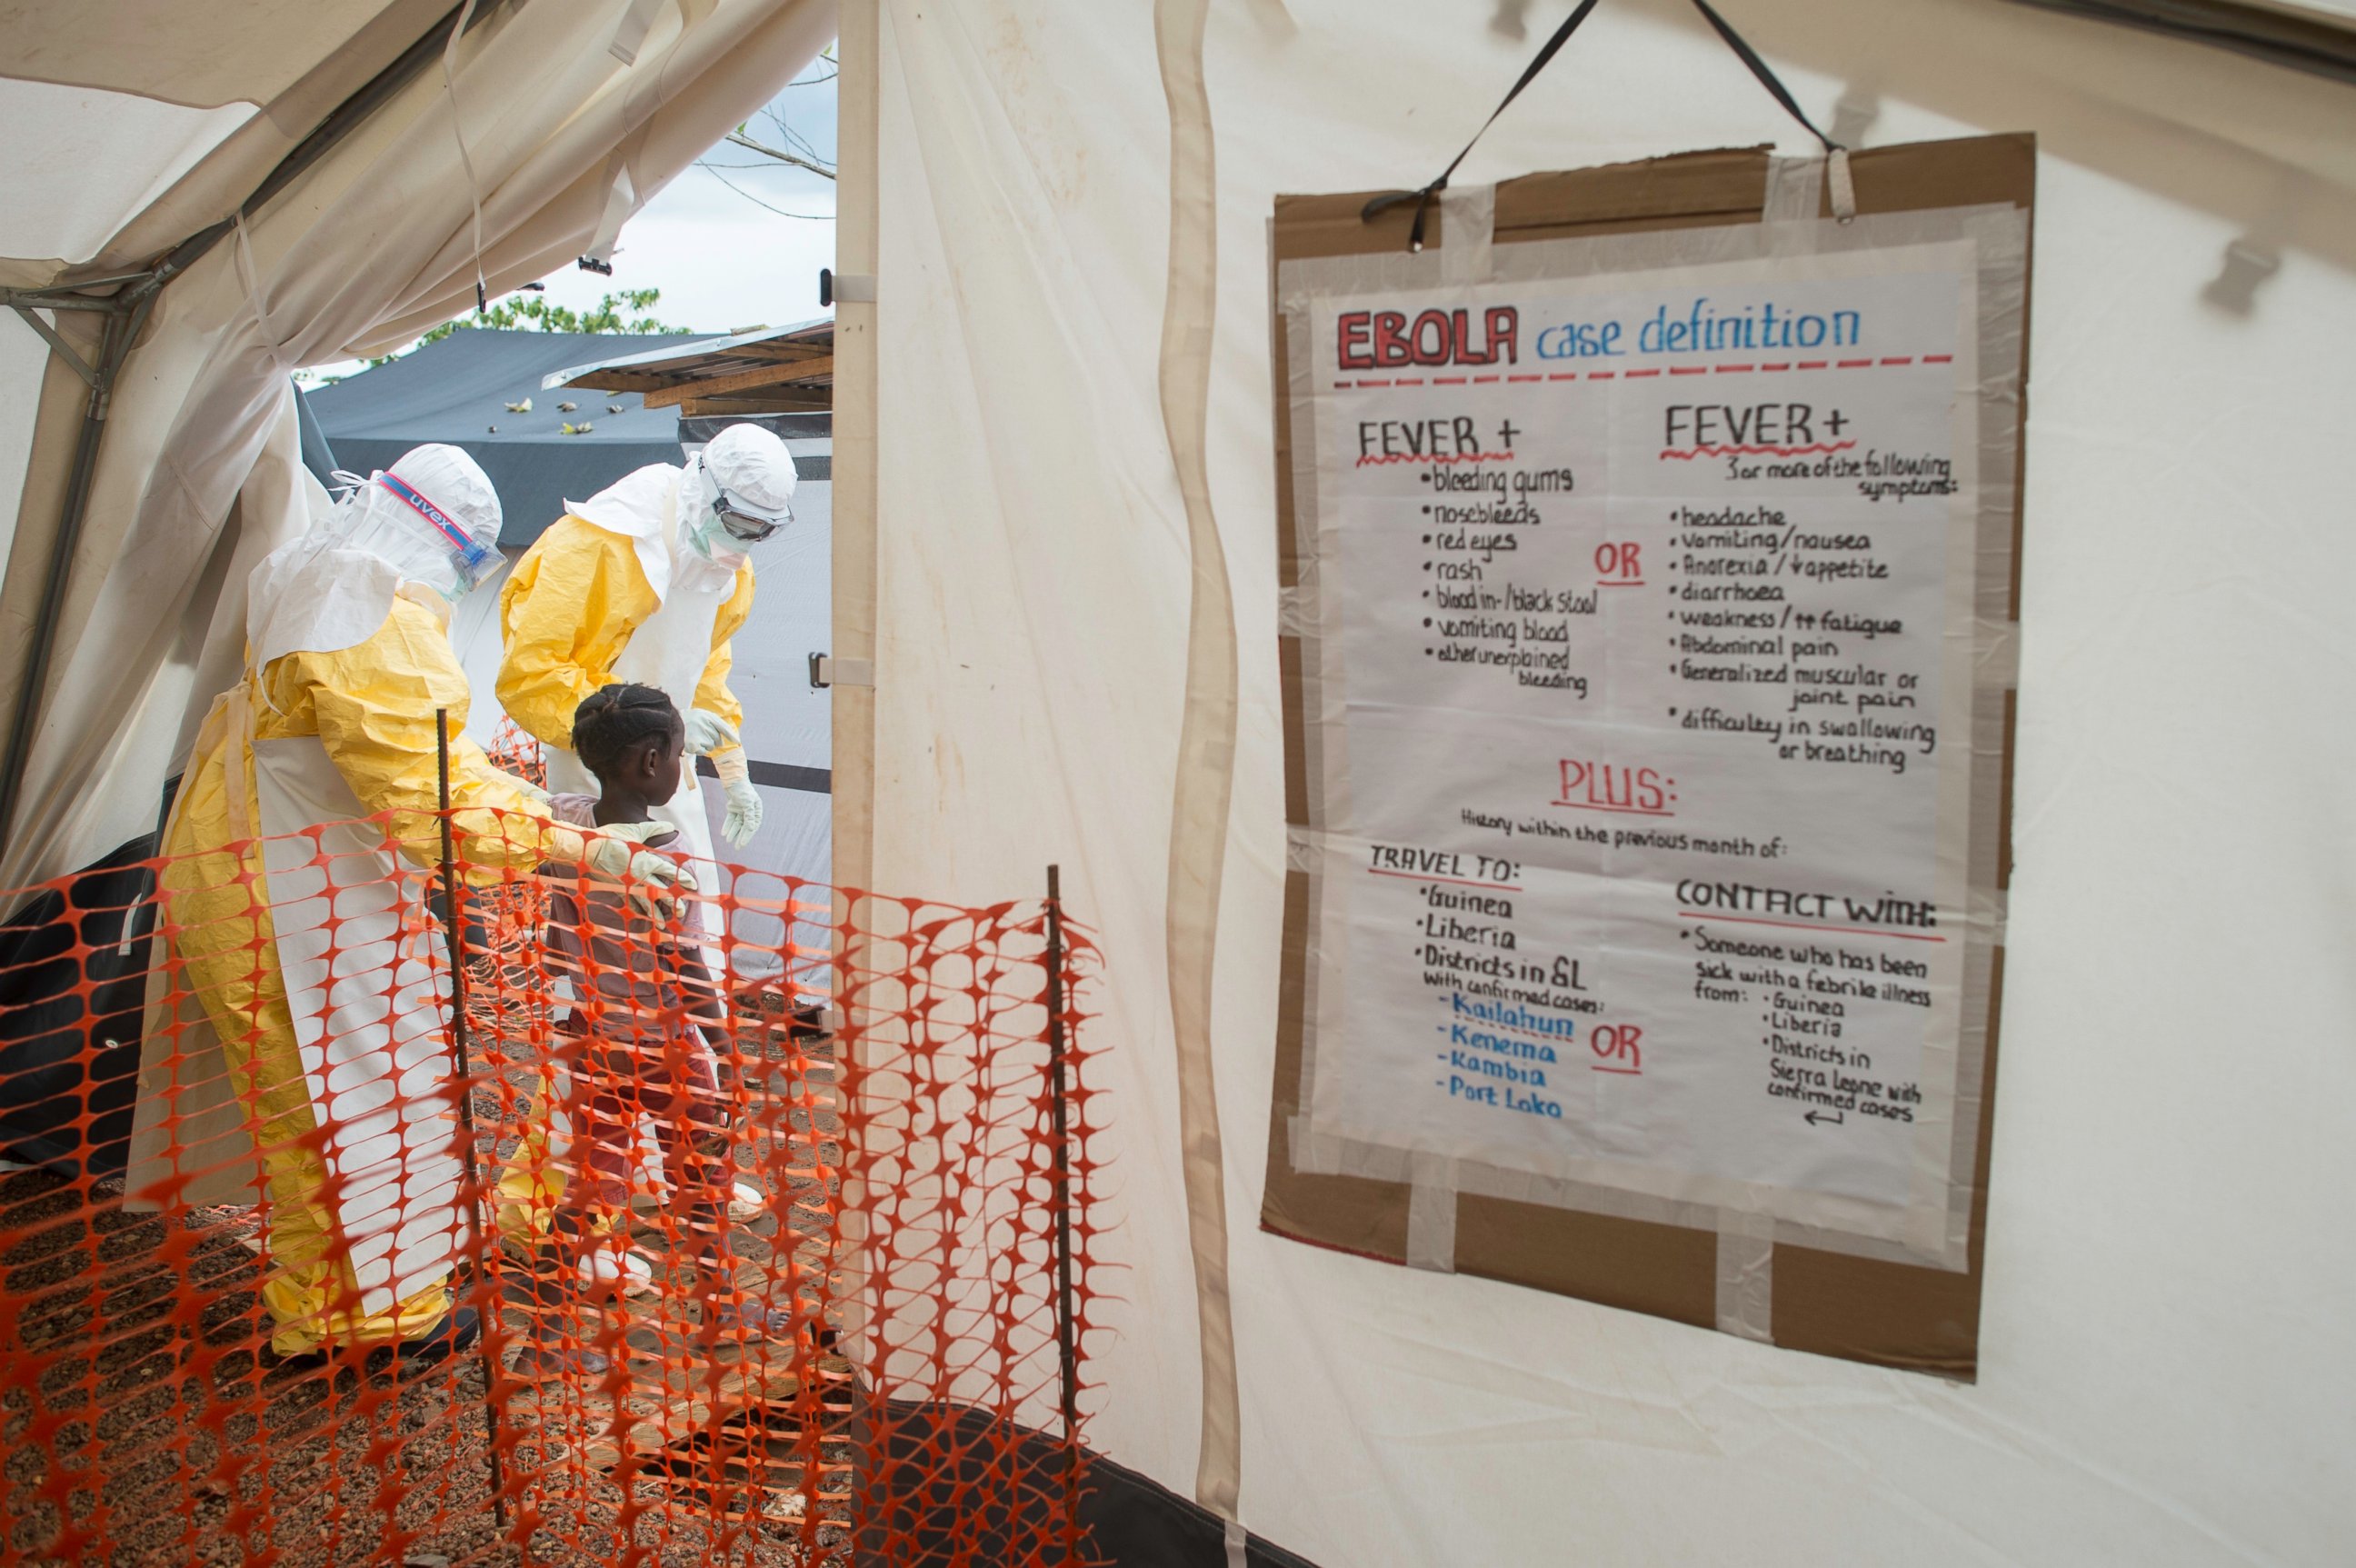 PHOTO: MSF staff show the way inside the Treatment Centre to a patient most likely infected with the Ebola virus/